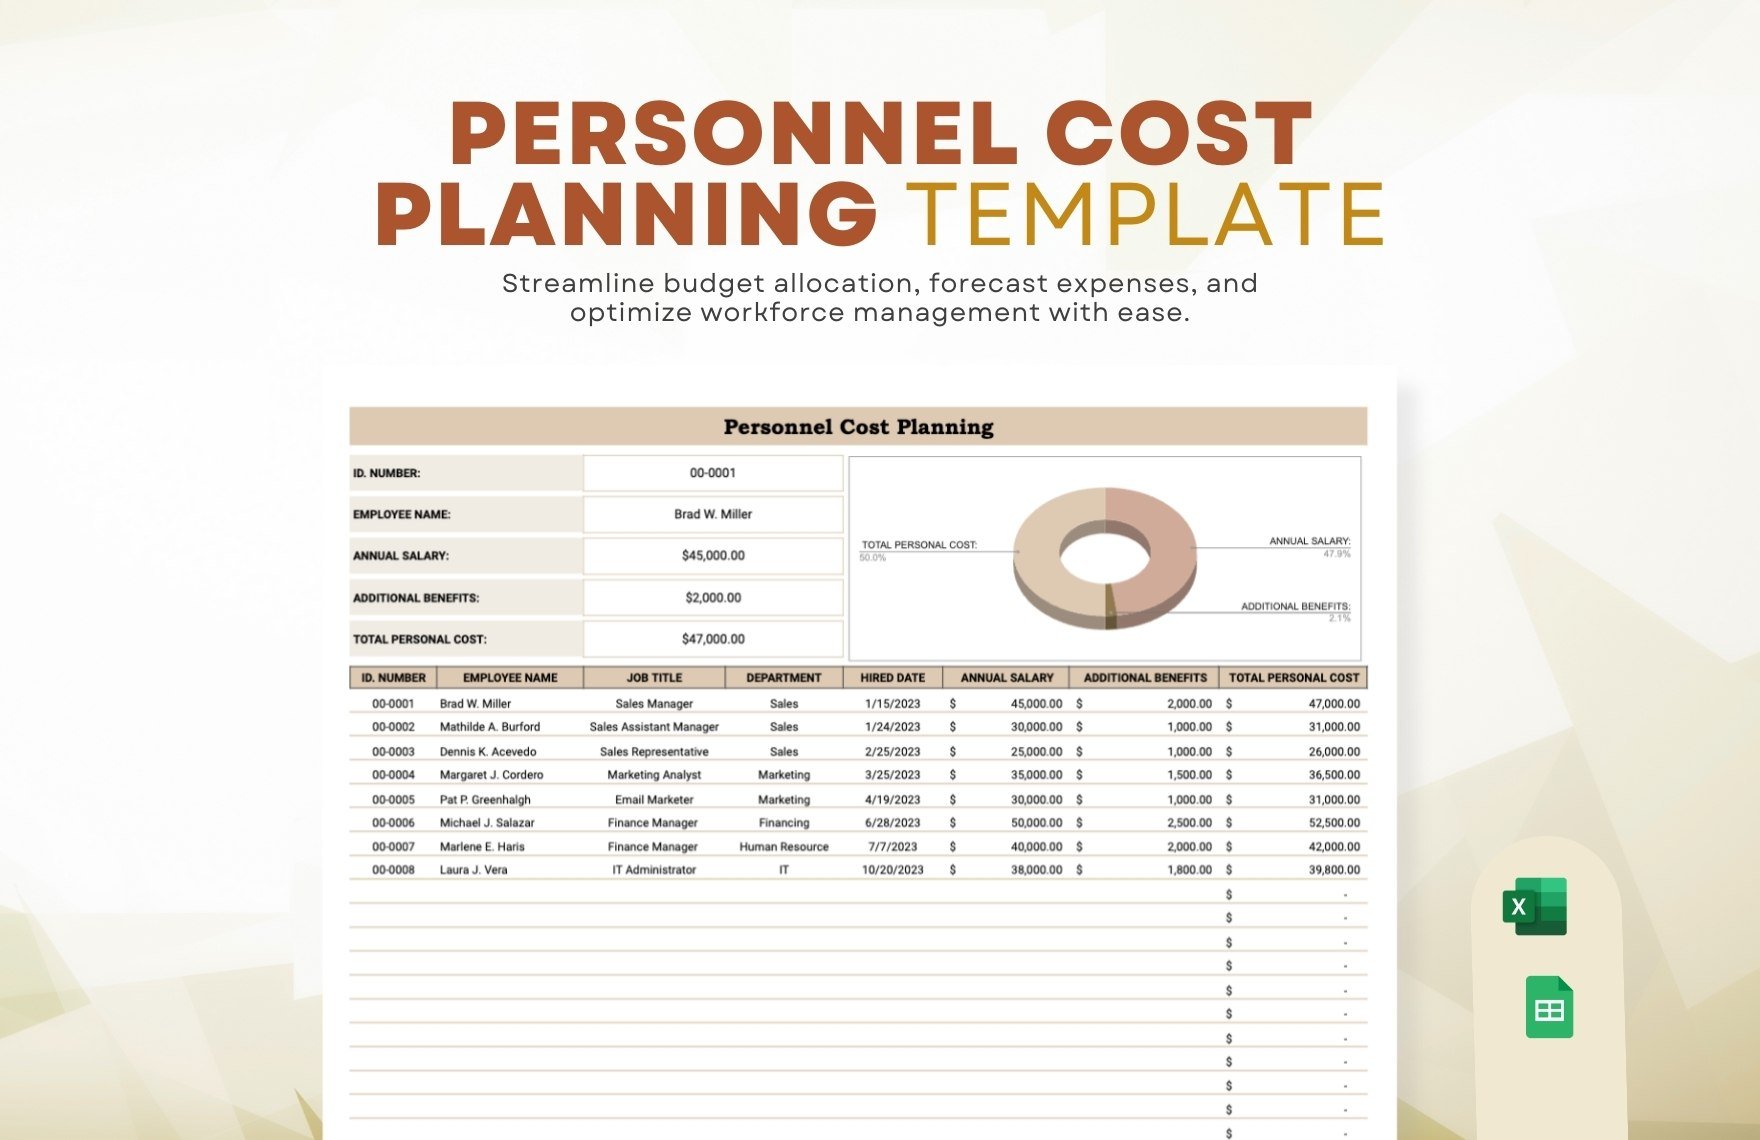 Personnel Cost Planning Template